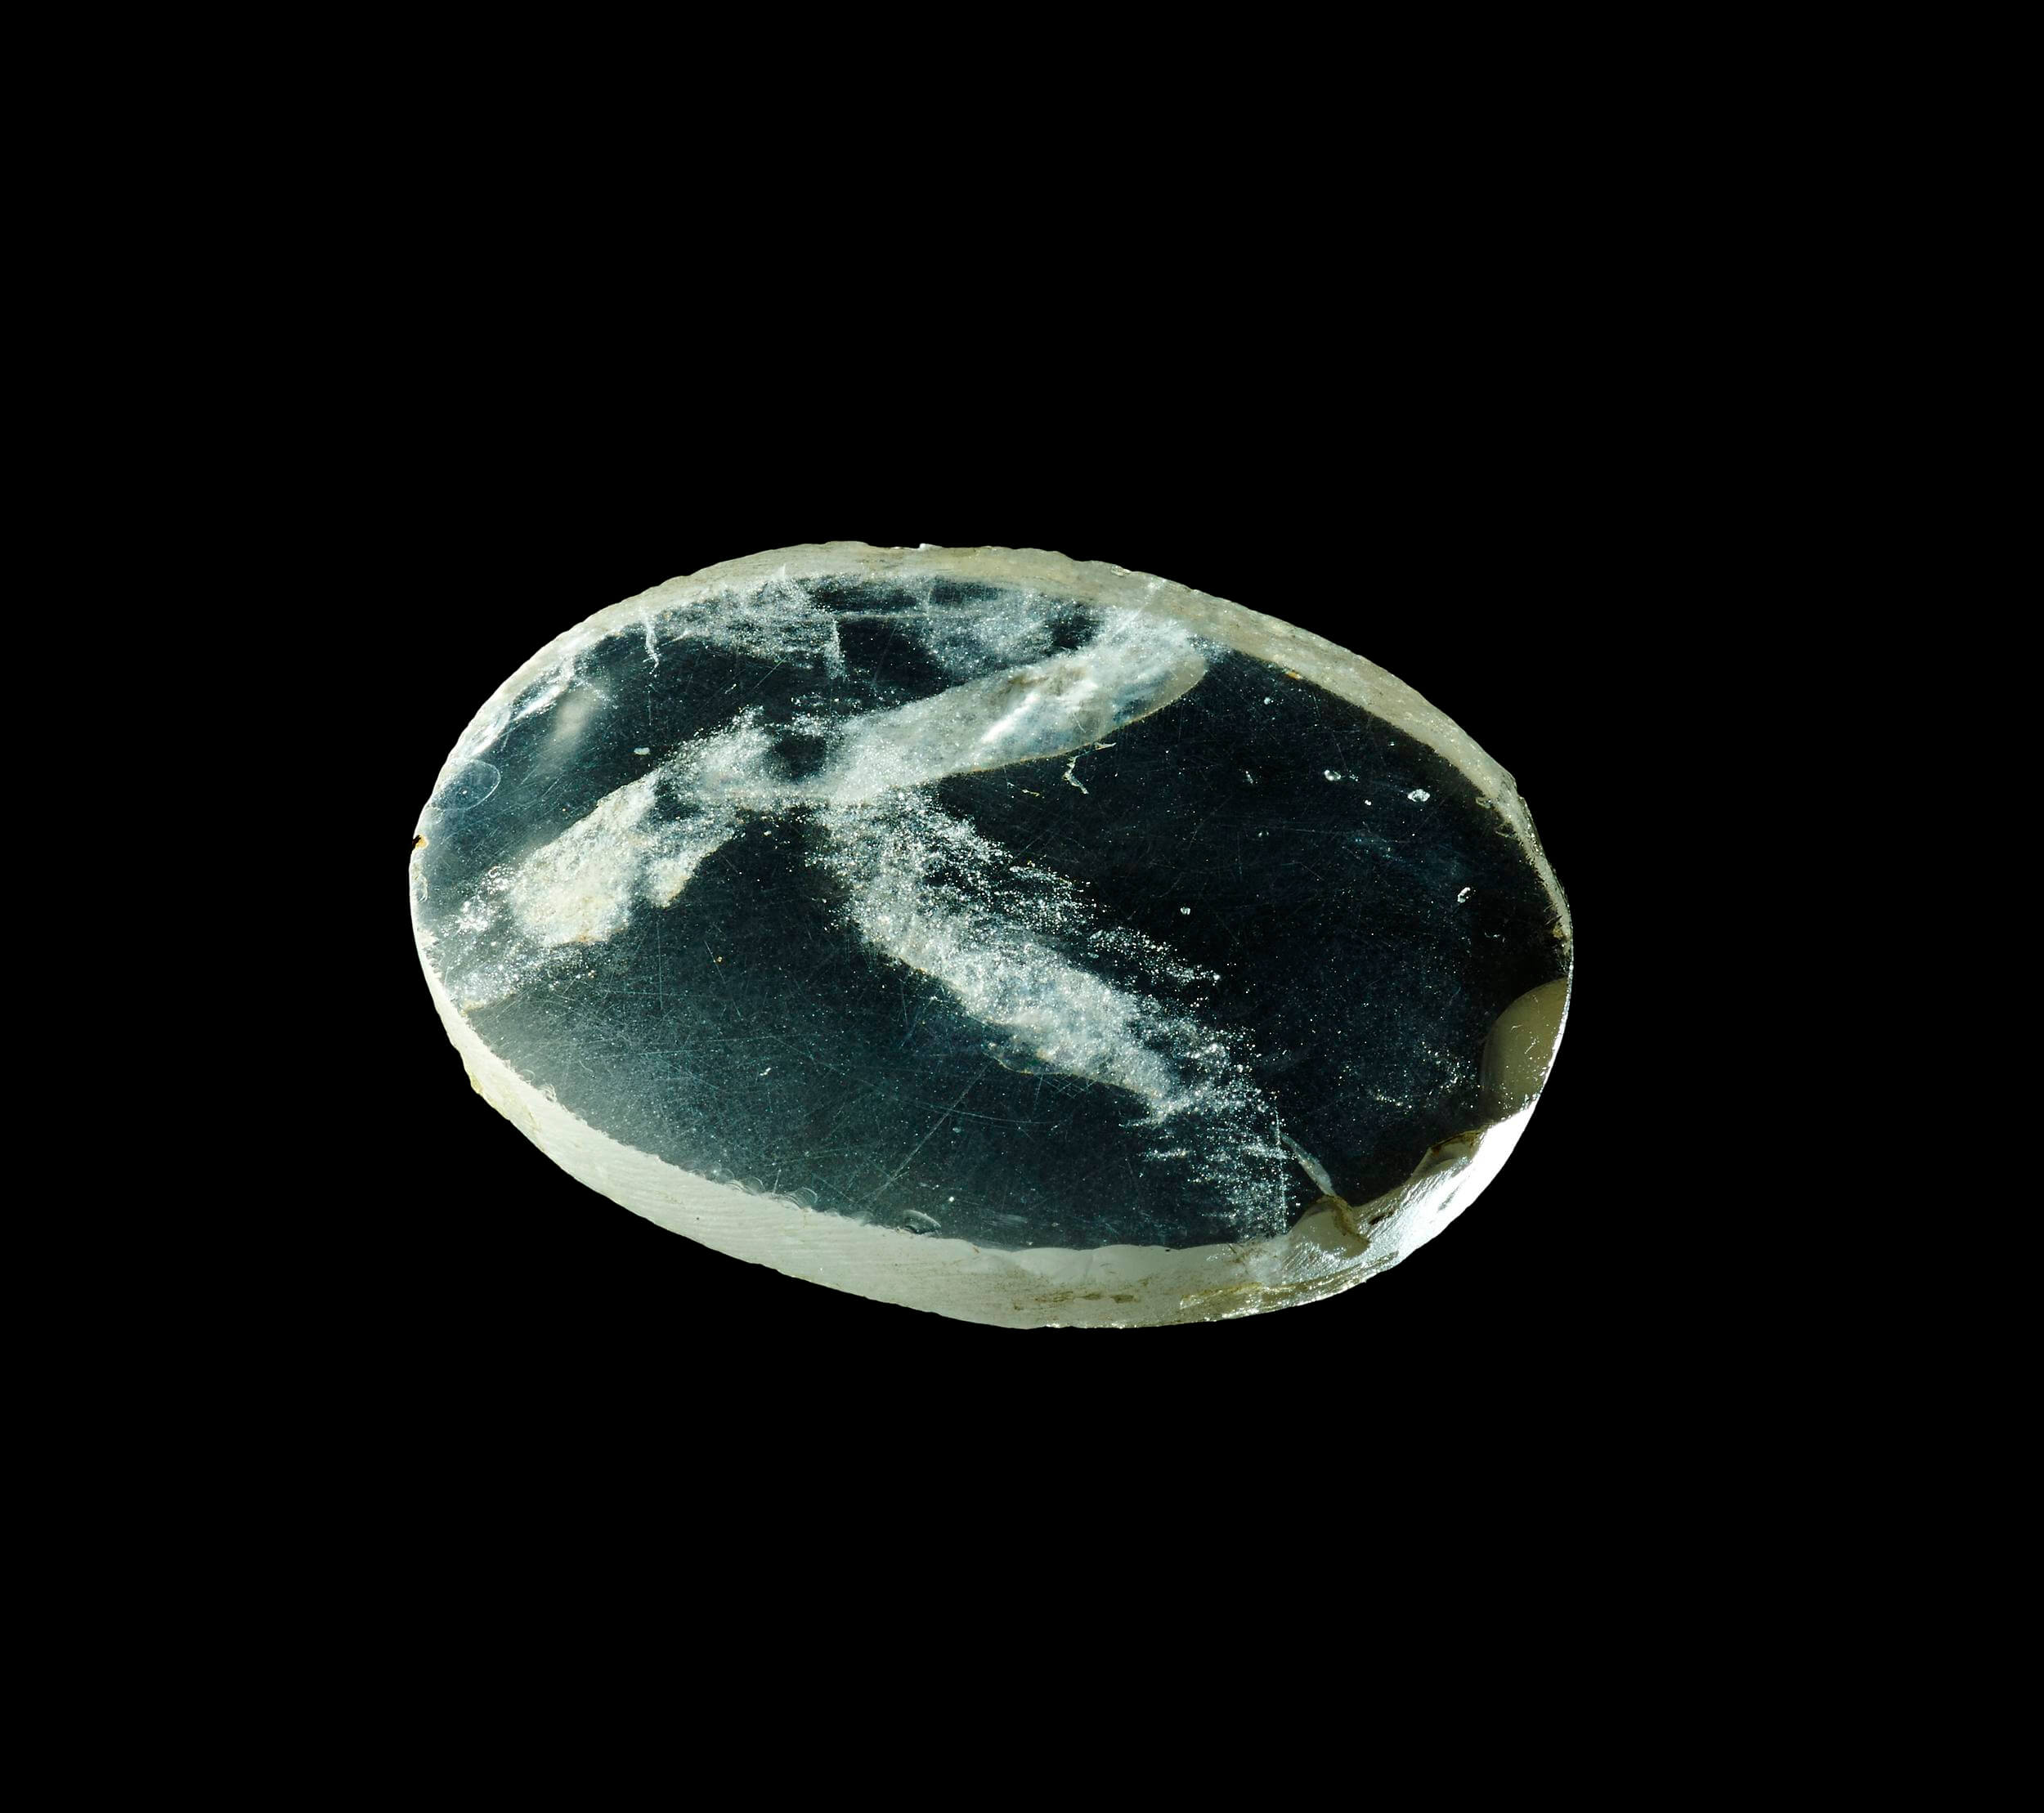 Oval rock-crystal inlay: ground and polished, with one plane and one slightly convex face. It has been regarded as an optical lens but would have been of little or no practical use. © The British Museum